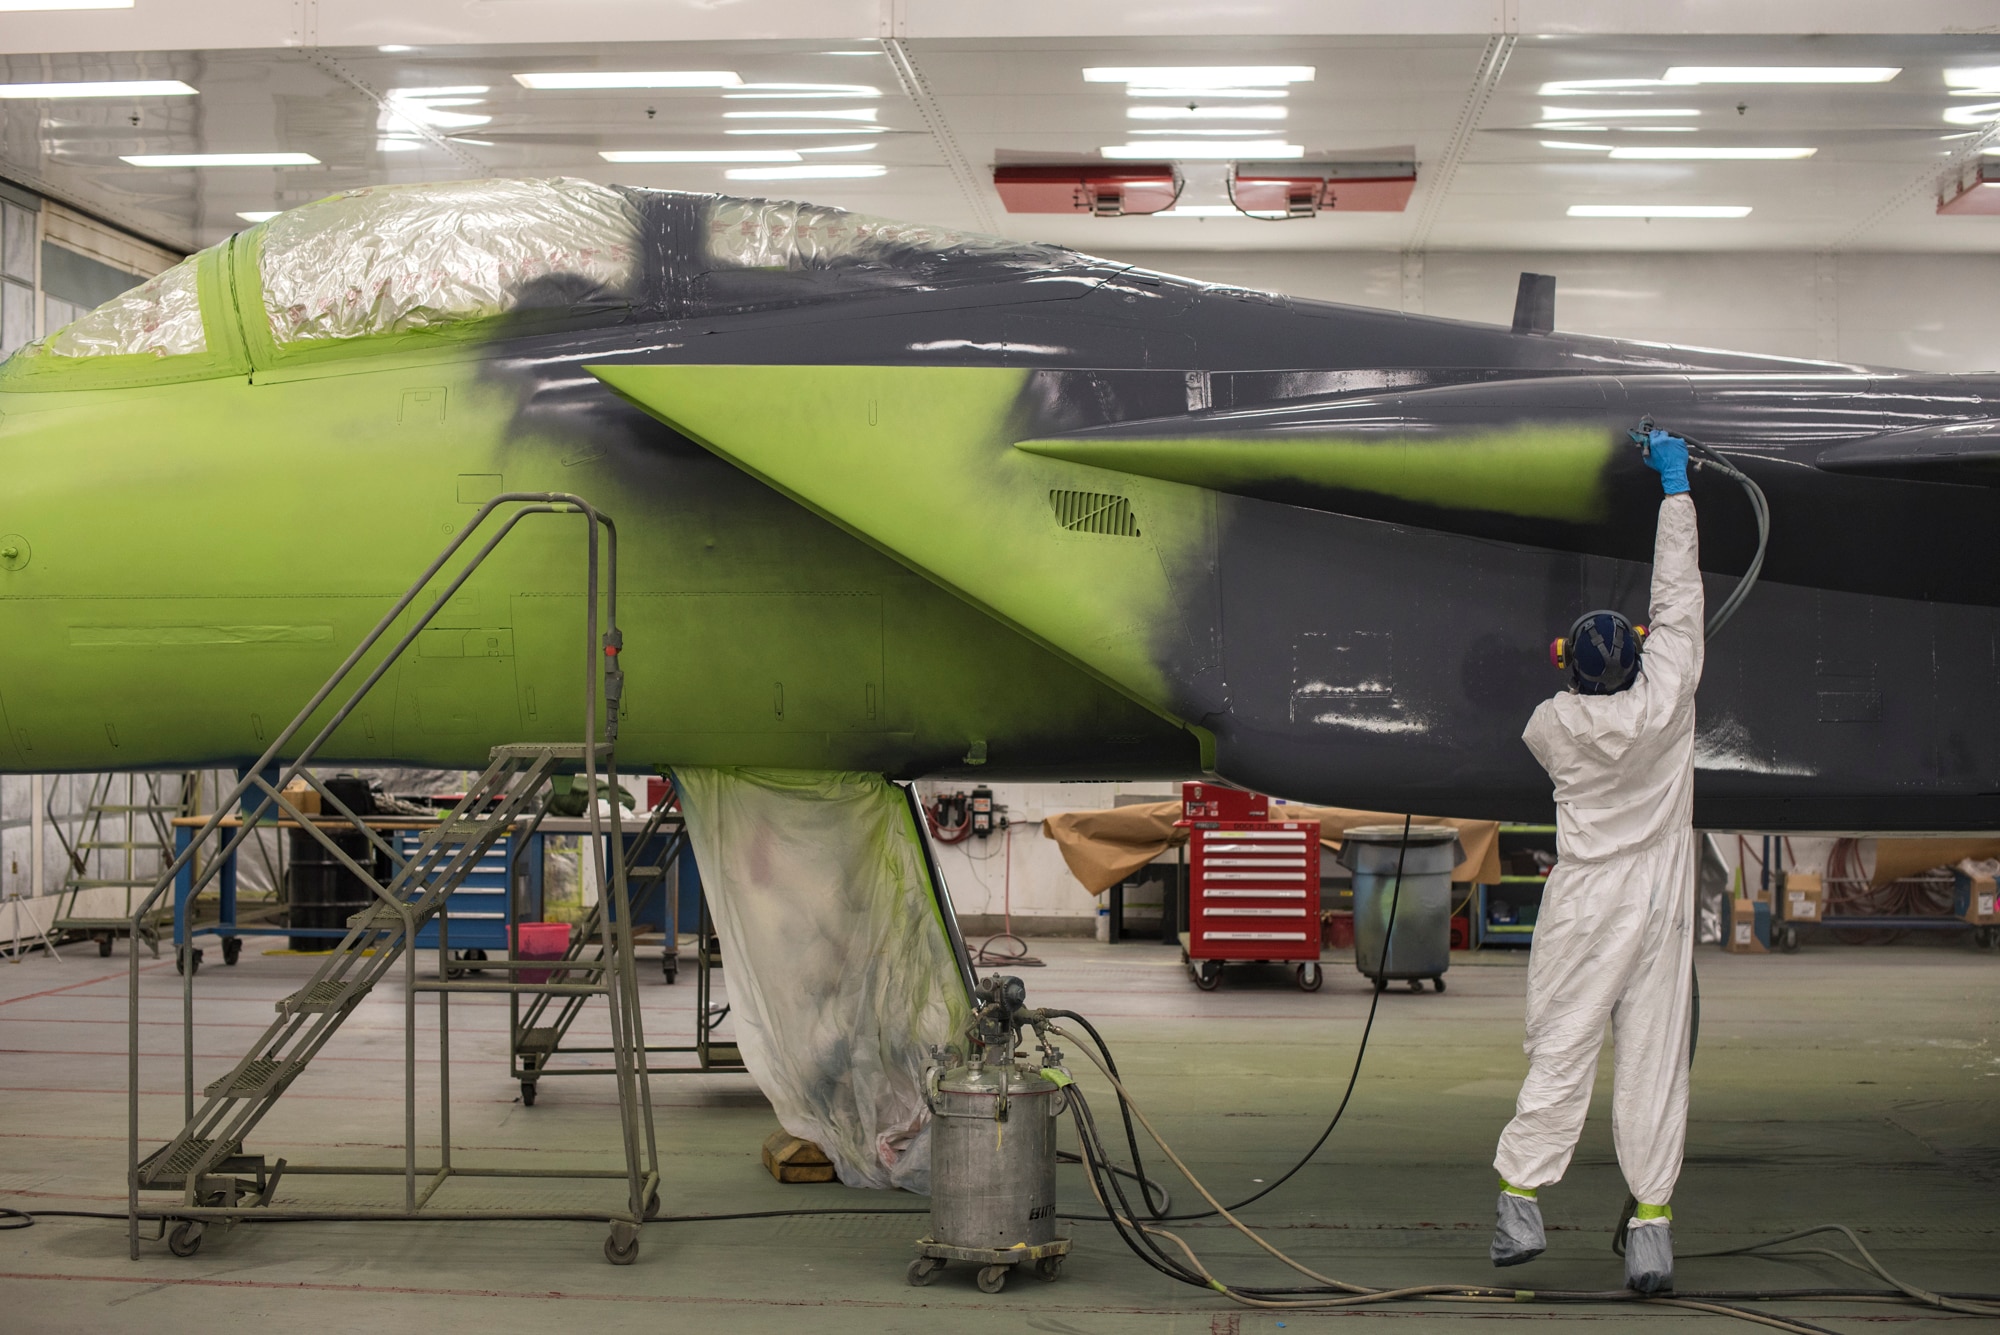 Michael Moore, 57th Maintenance Squadron aircraft painter, applies paint to an F-15C Eagle at Nellis Air Force Base, Nev., Oct. 25, 2017. The aircraft is being repainted to recognize the Air Force's 70th Anniversary as well as the unity between the Las Vegas community and Nellis AFB. (U.S. Air Force photo by Airman 1st Class Andrew D. Sarver/Released)